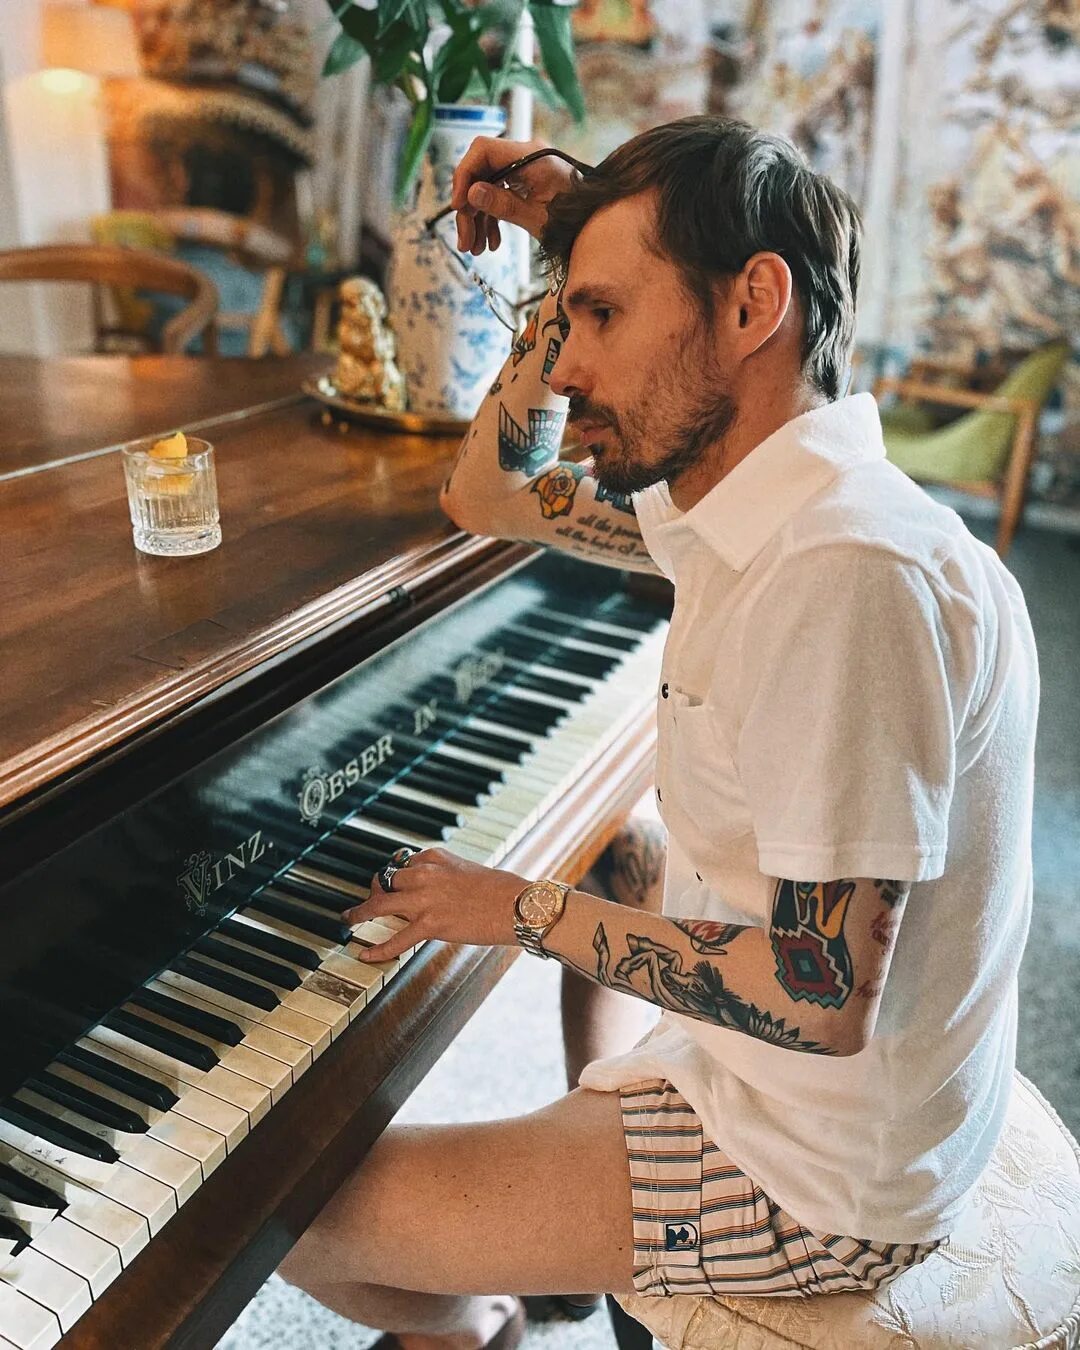 𝐃 𝐚 𝐧 𝐝 𝐲 𝐃 𝐞 𝐥 𝐌 𝐚 𝐫 в Instagram: "Piano Lounging in the V...